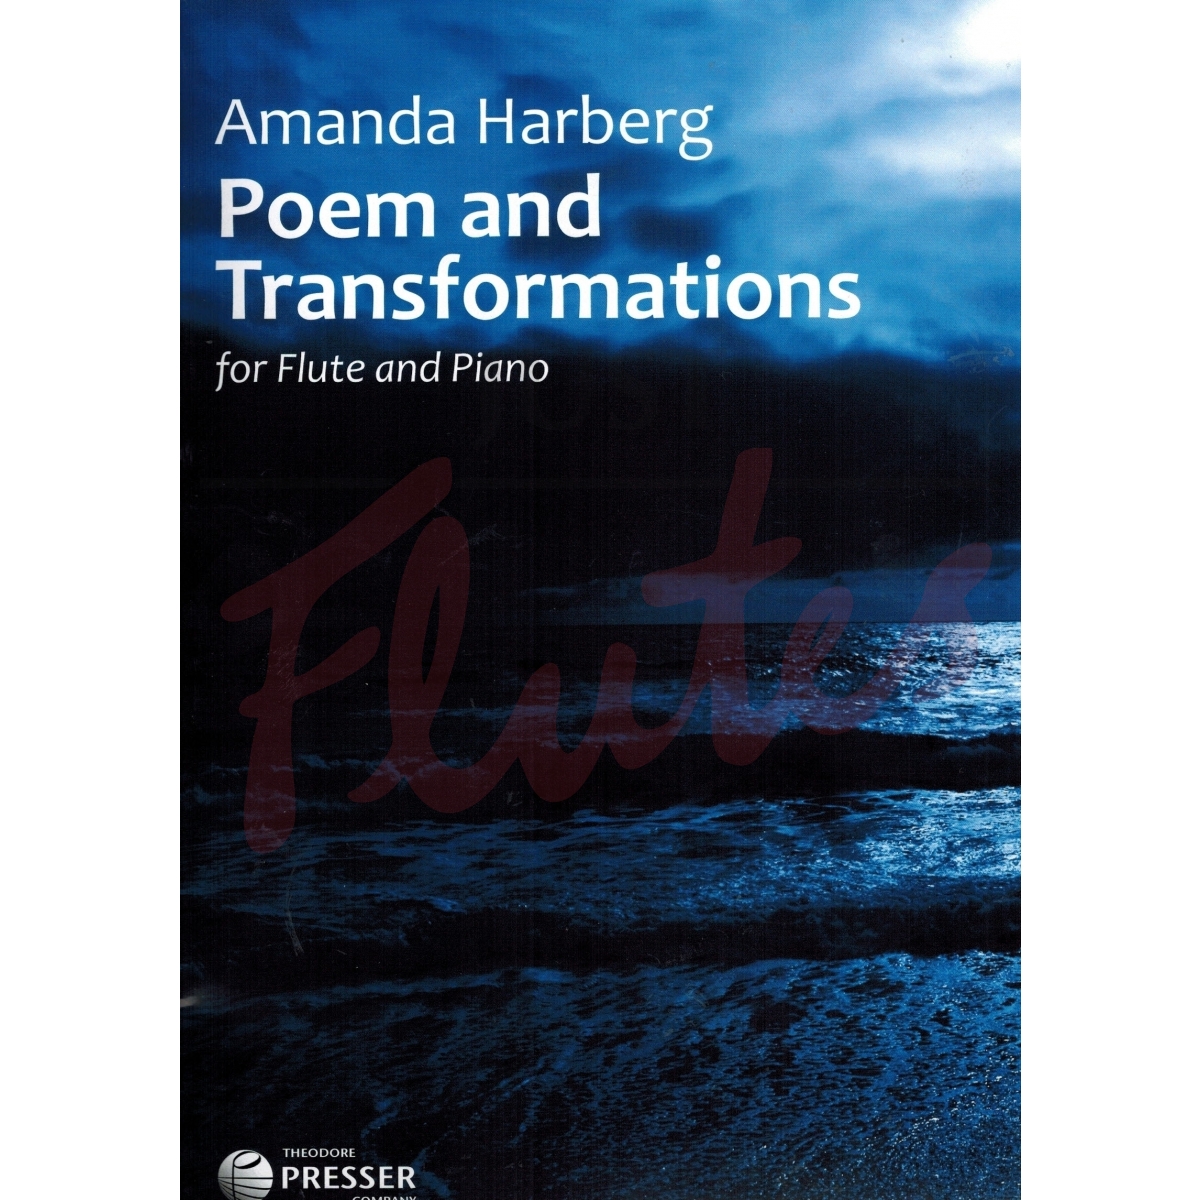 Poem and Transformations